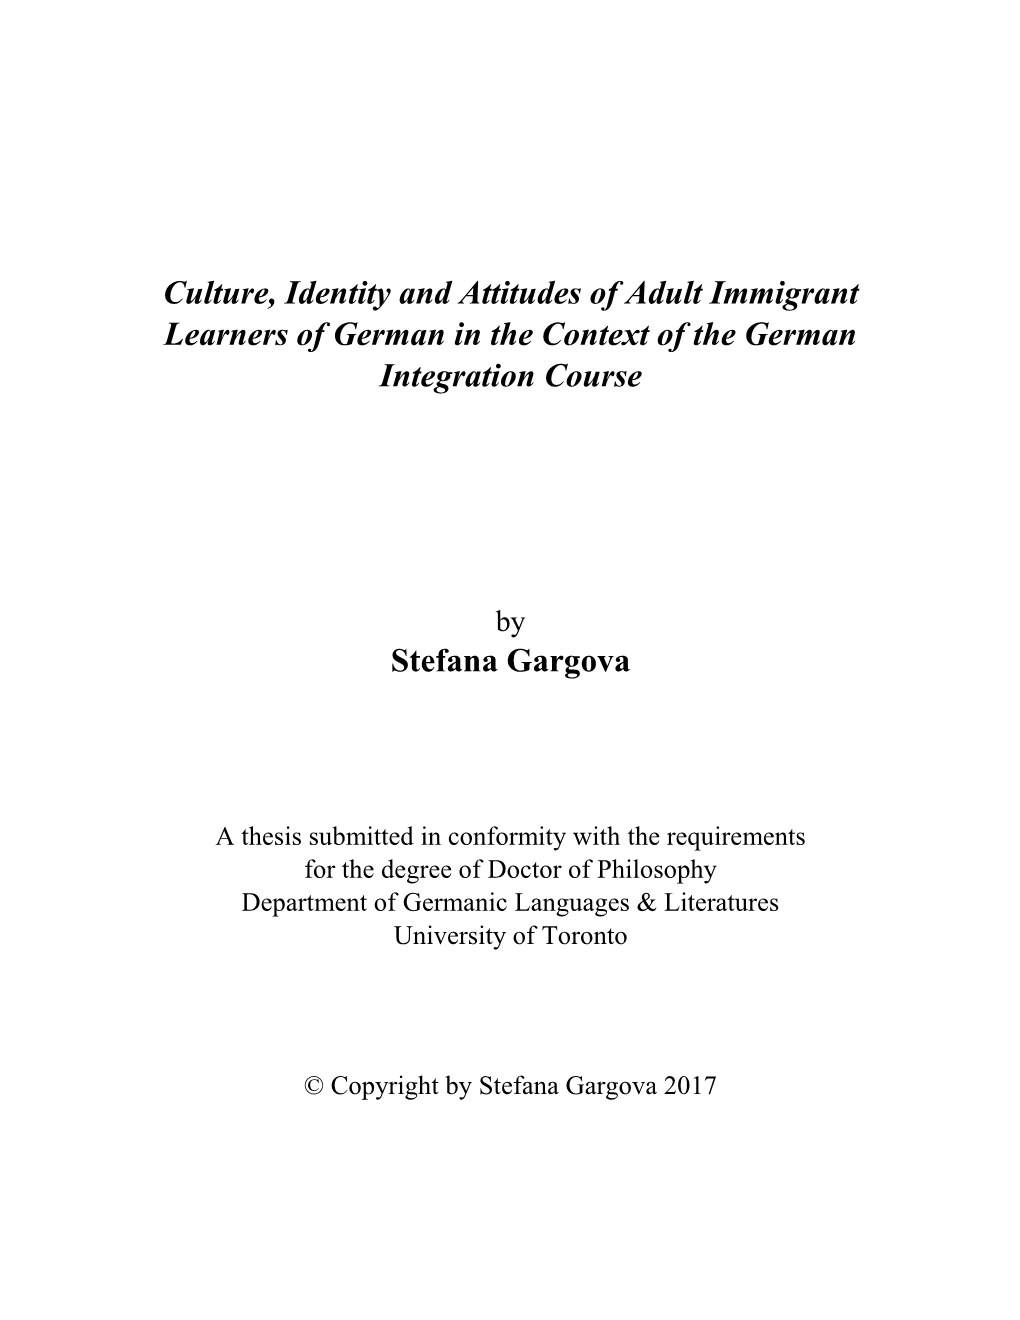 Culture, Identity and Attitudes of Adult Immigrant Learners of German in the Context of the German Integration Course